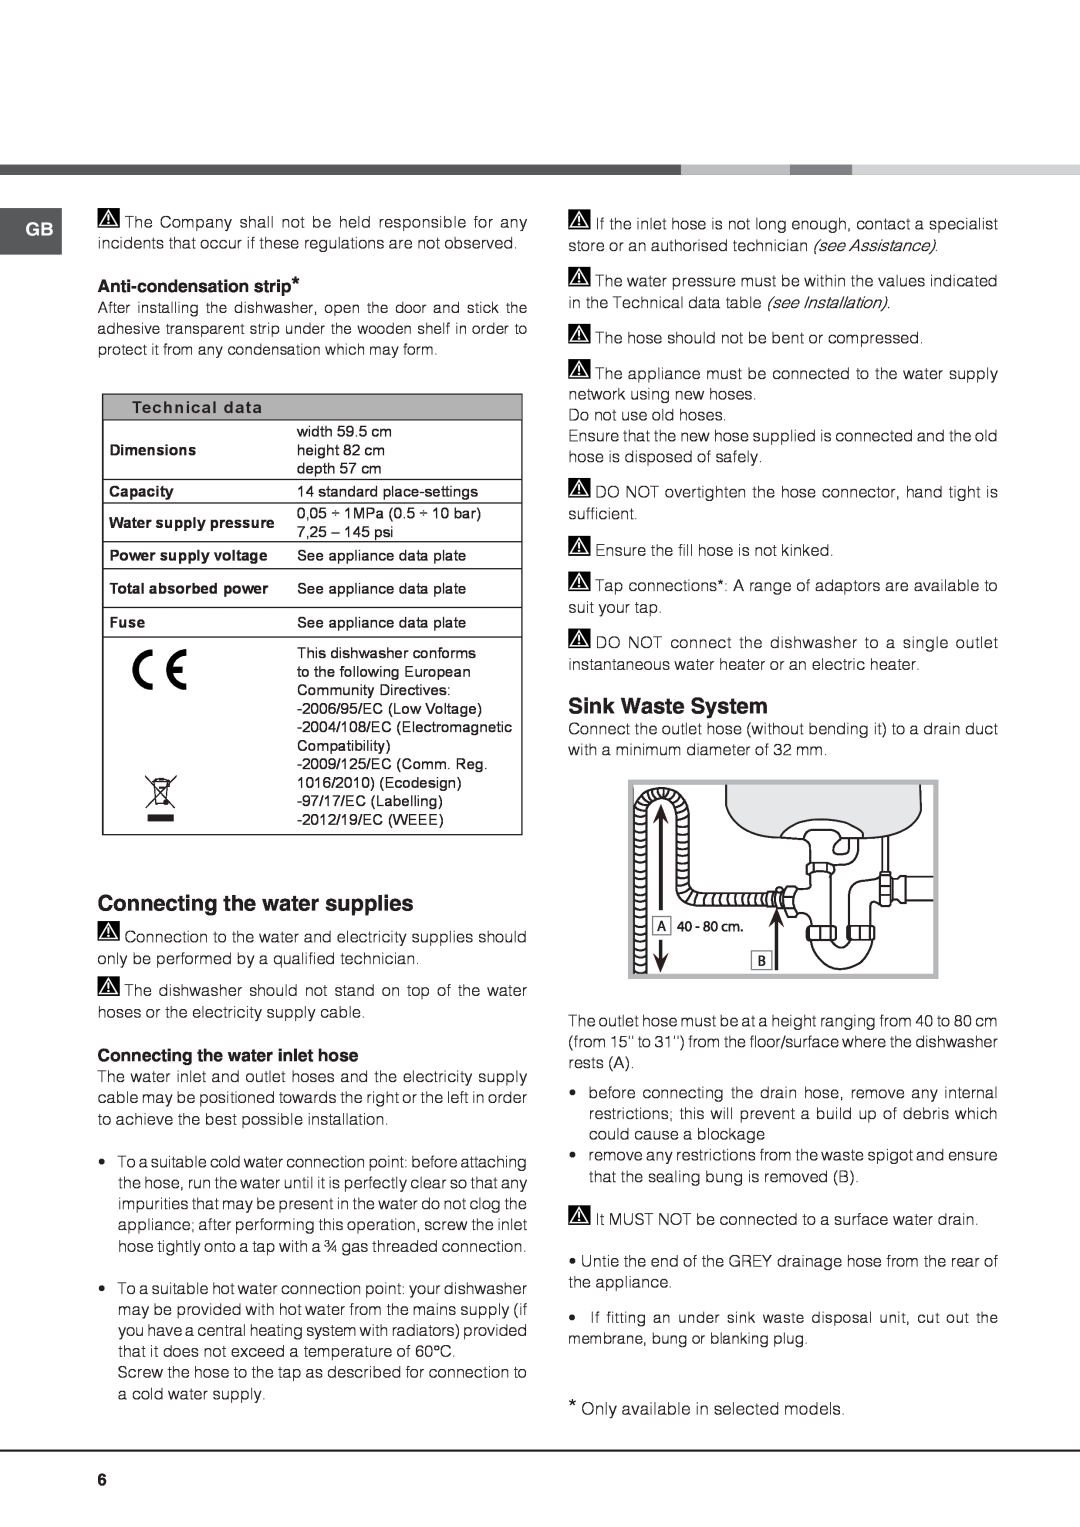 Hotpoint LTF 11M113 7C manual Sink Waste System, Connecting the water supplies, Anti-condensationstrip, Technical data 